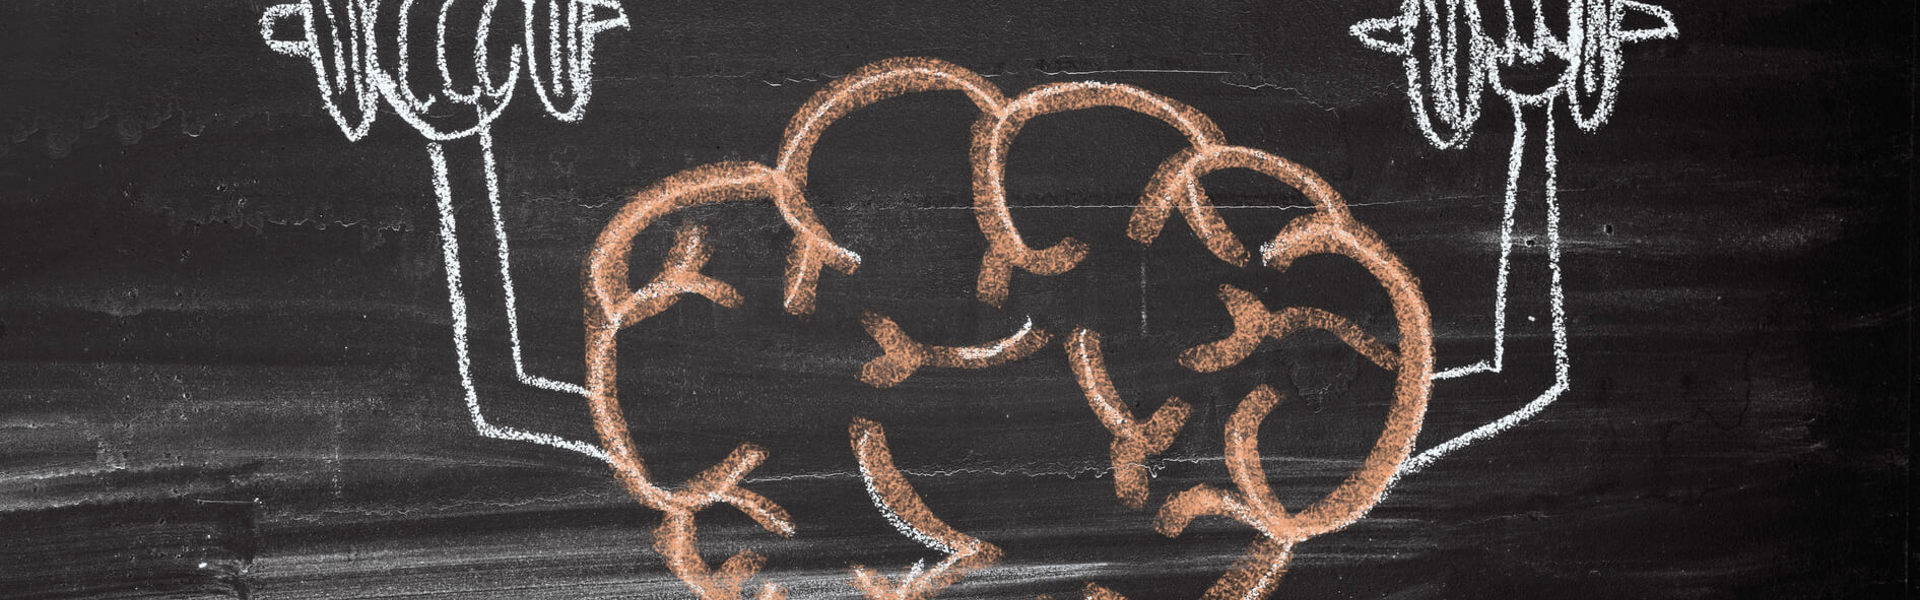 a chalk drawing of a brain lifting weights on a black chalkboard